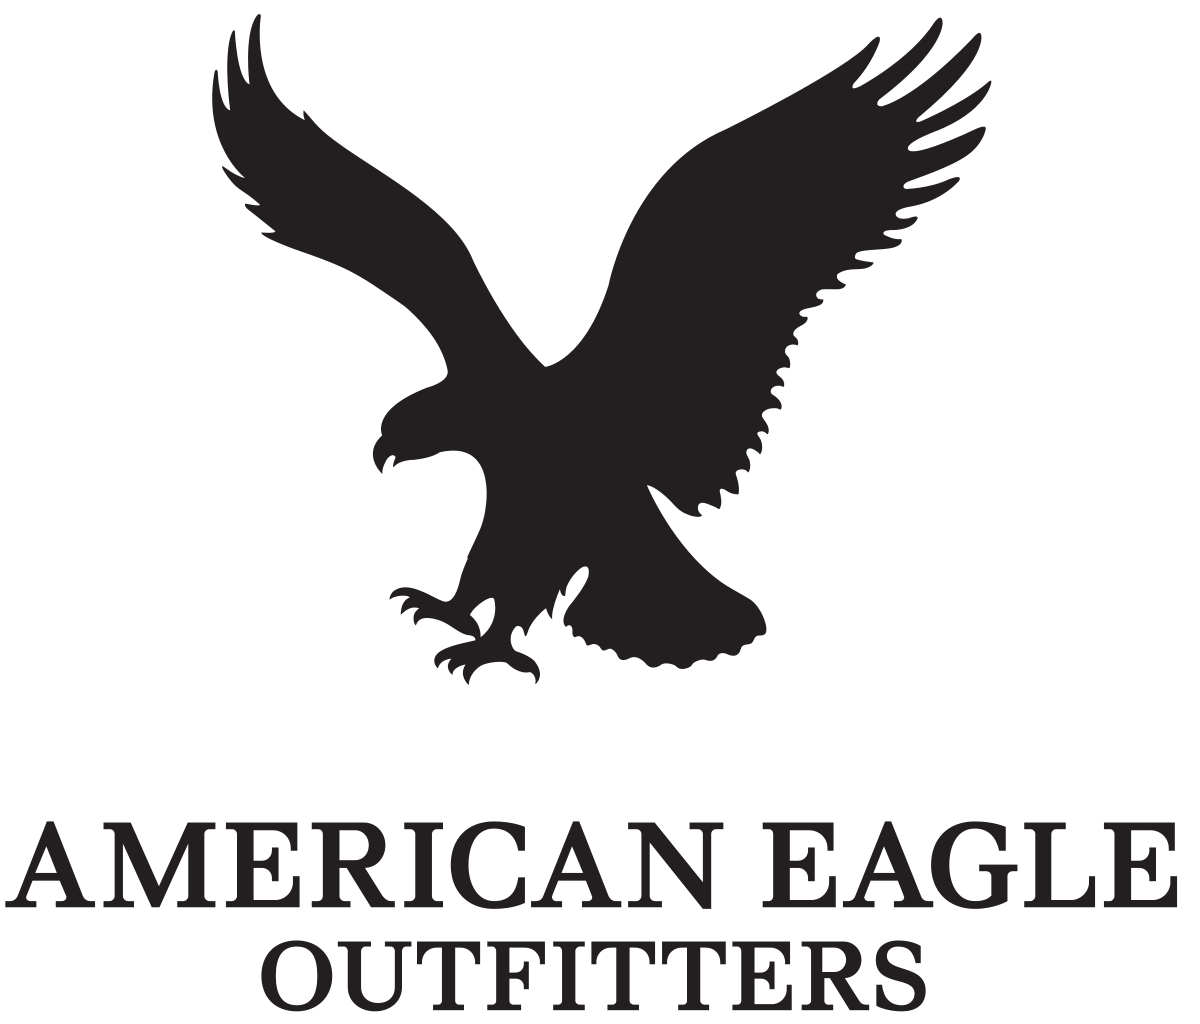 New American Eagle Logo - American Eagle Outfitters